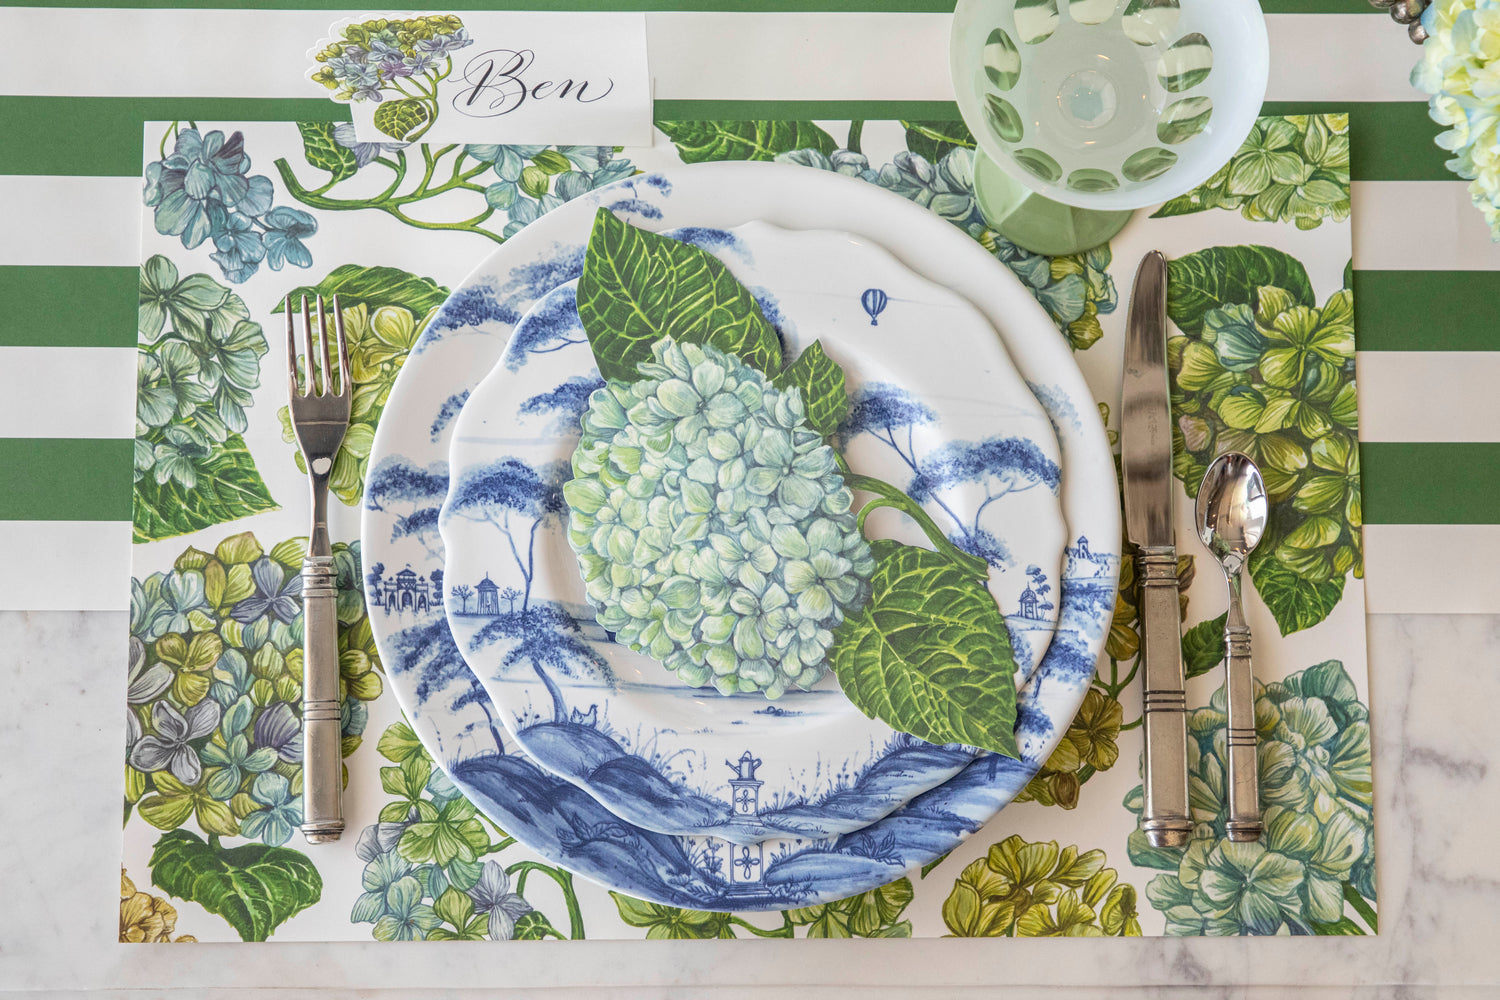 An elegant experience of dining with a plate adorned with silverware and placed on a Hester &amp; Cook Blooming Hydrangeas Placemat.